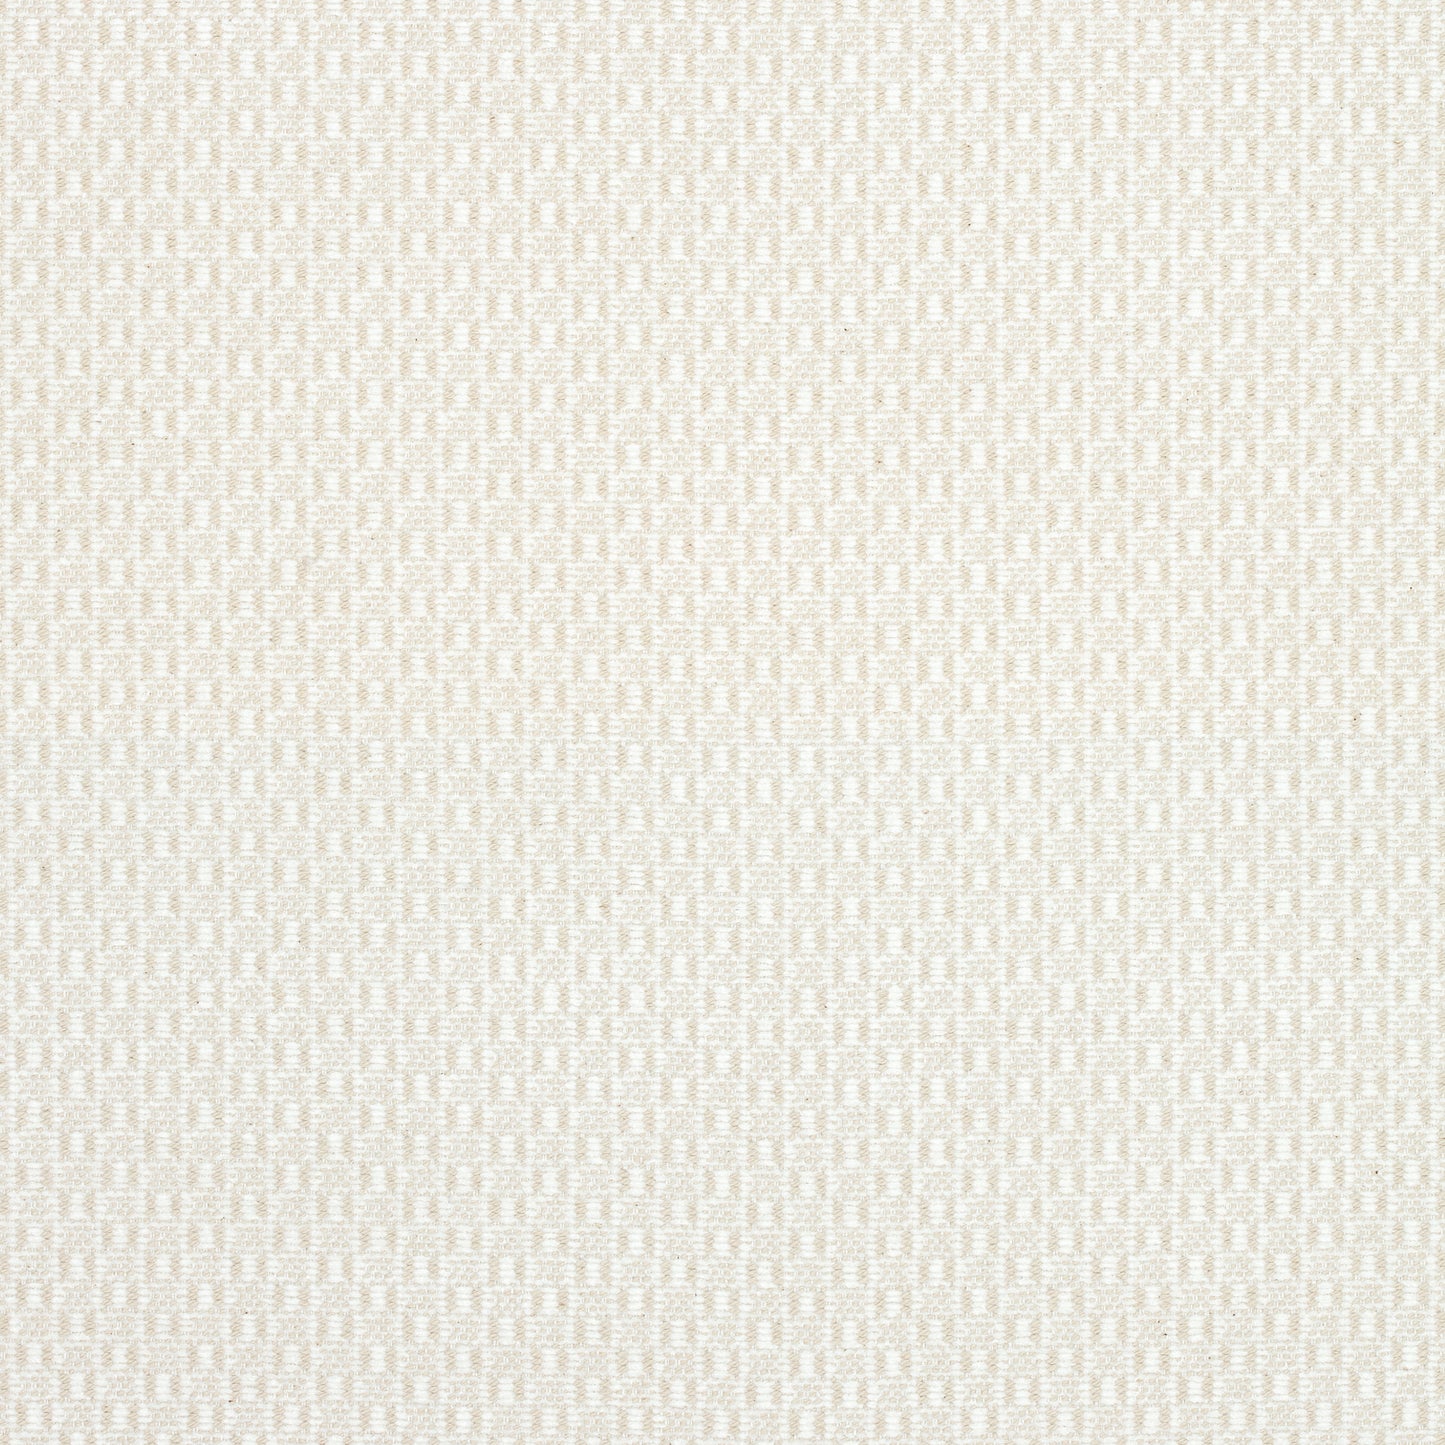 Purchase Thibaut Fabric Item# W789138 pattern name Emilie color Almond